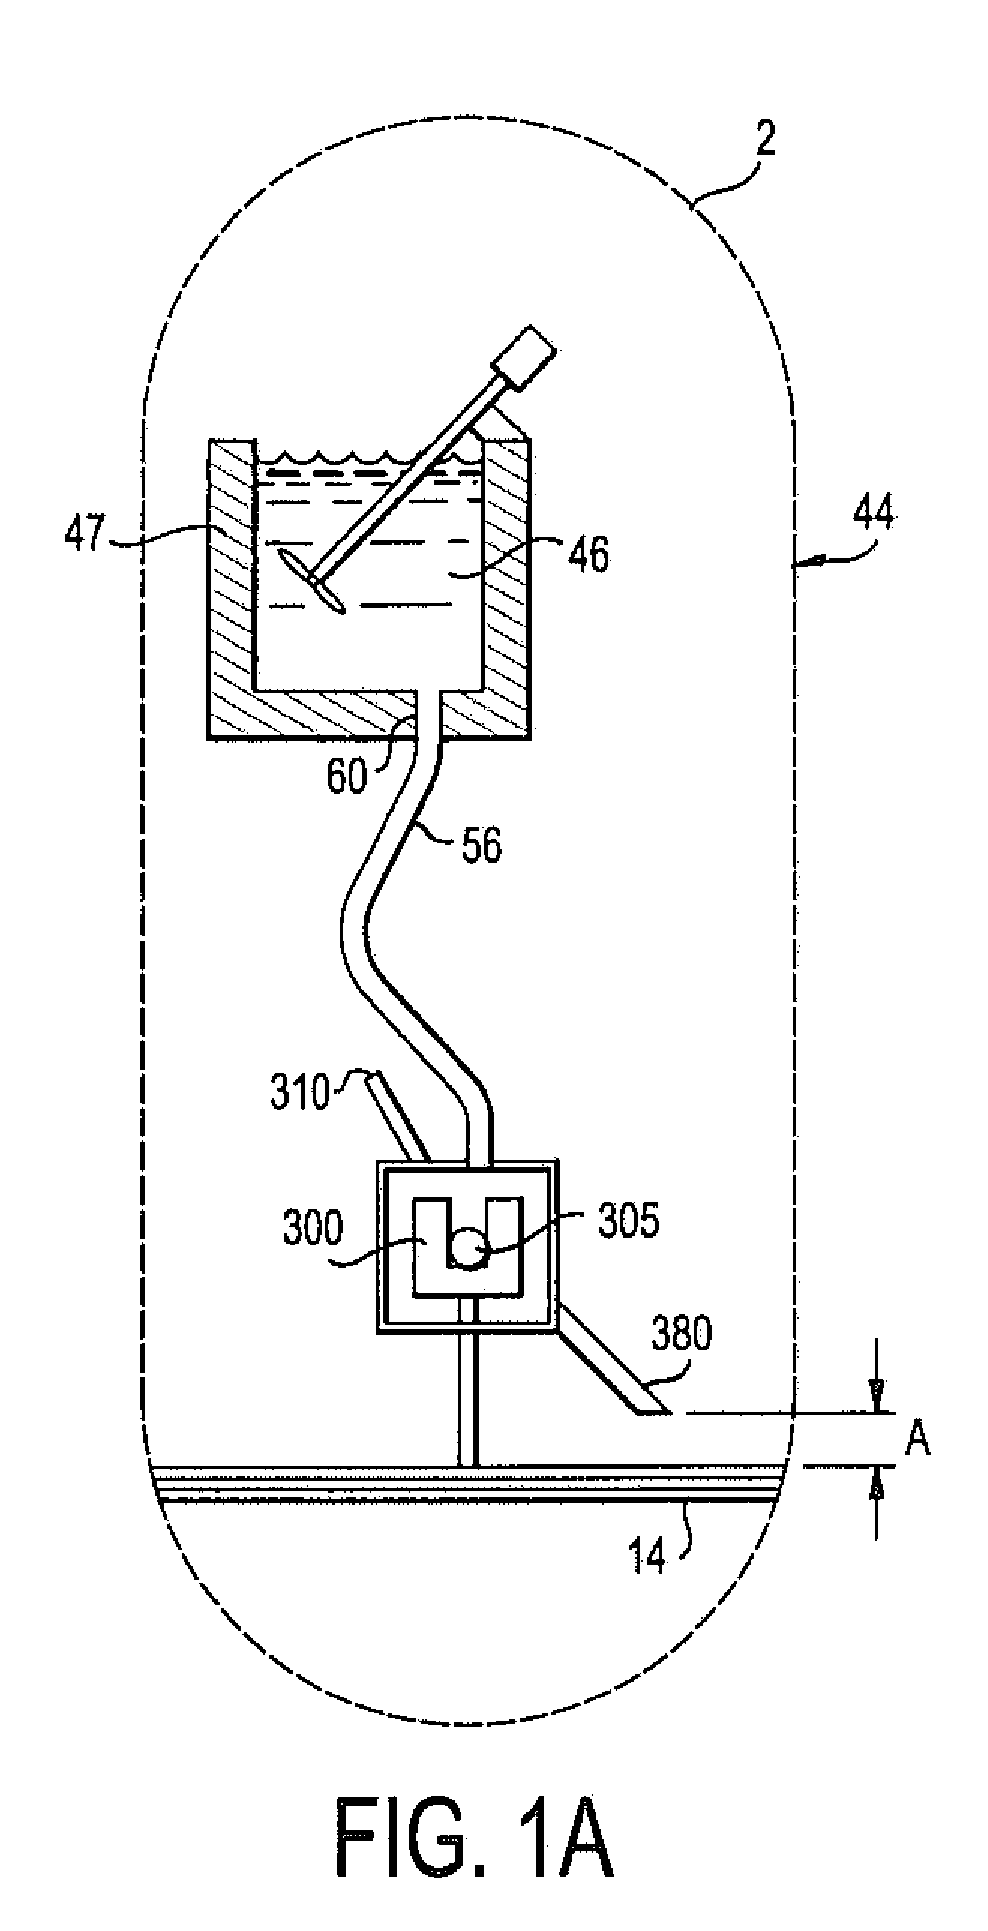 Process and apparatus for feeding cementitious slurry for fiber-reinforced structural cement panels